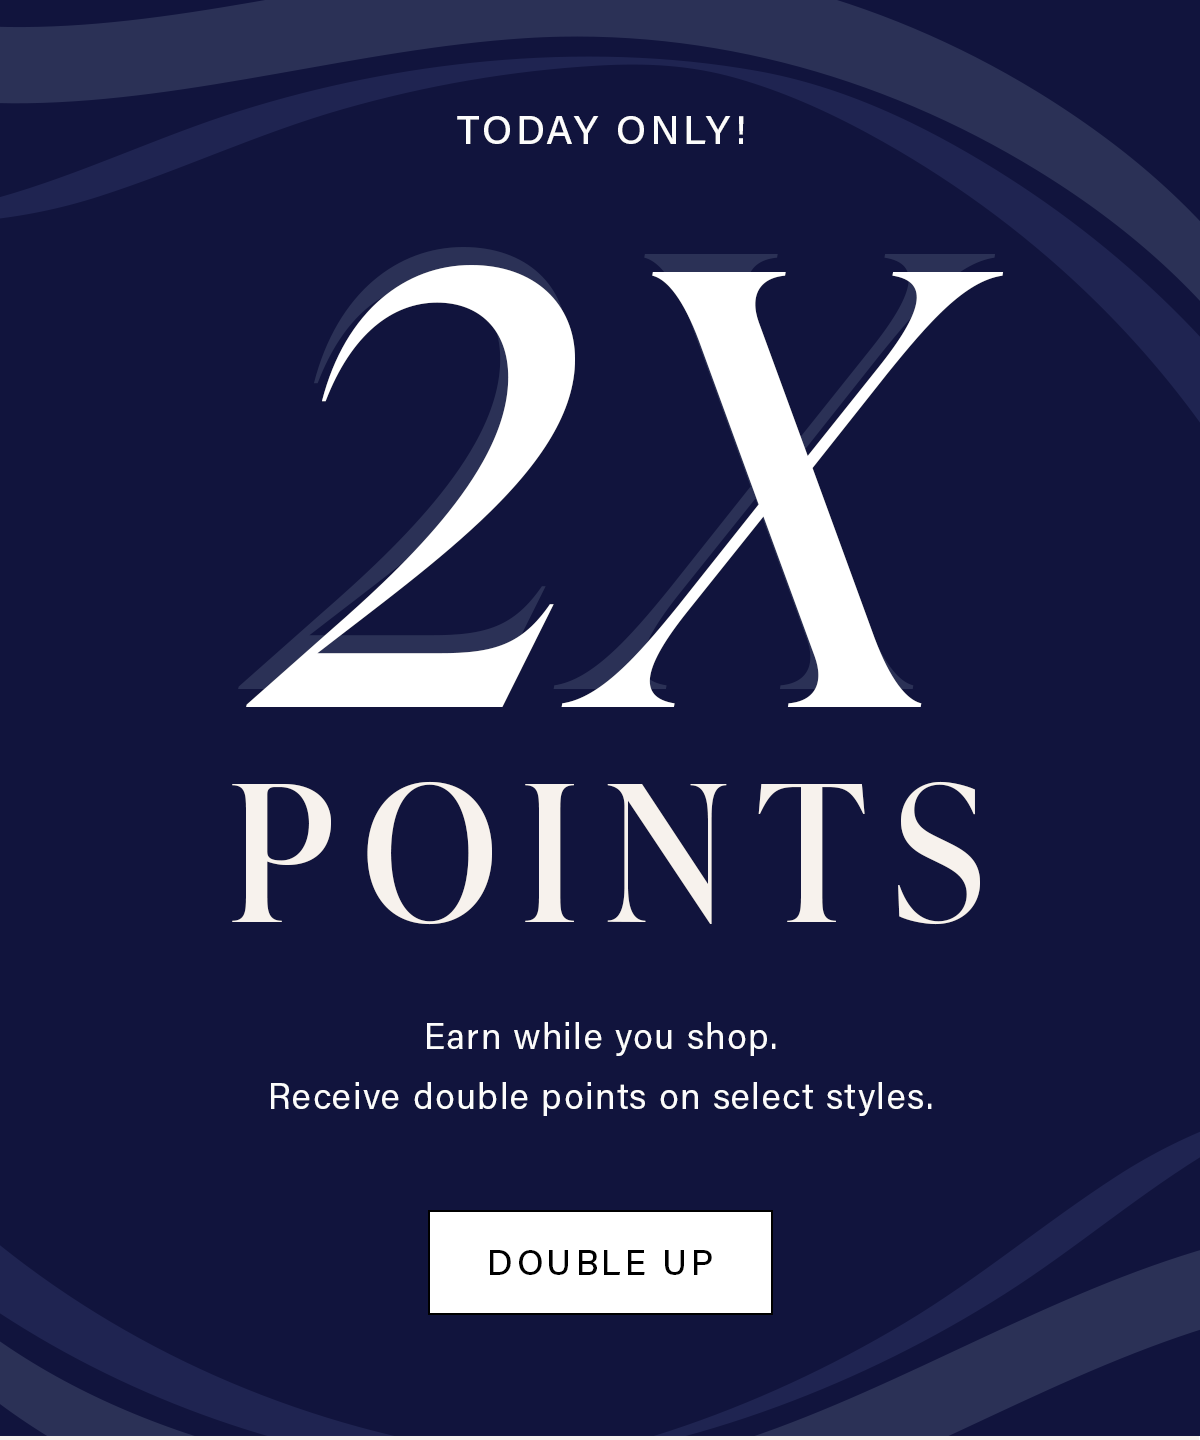 TODAY ONLY! 2X POINTS Earn while you shop. Receive double points on select styles. DOUBLE UP